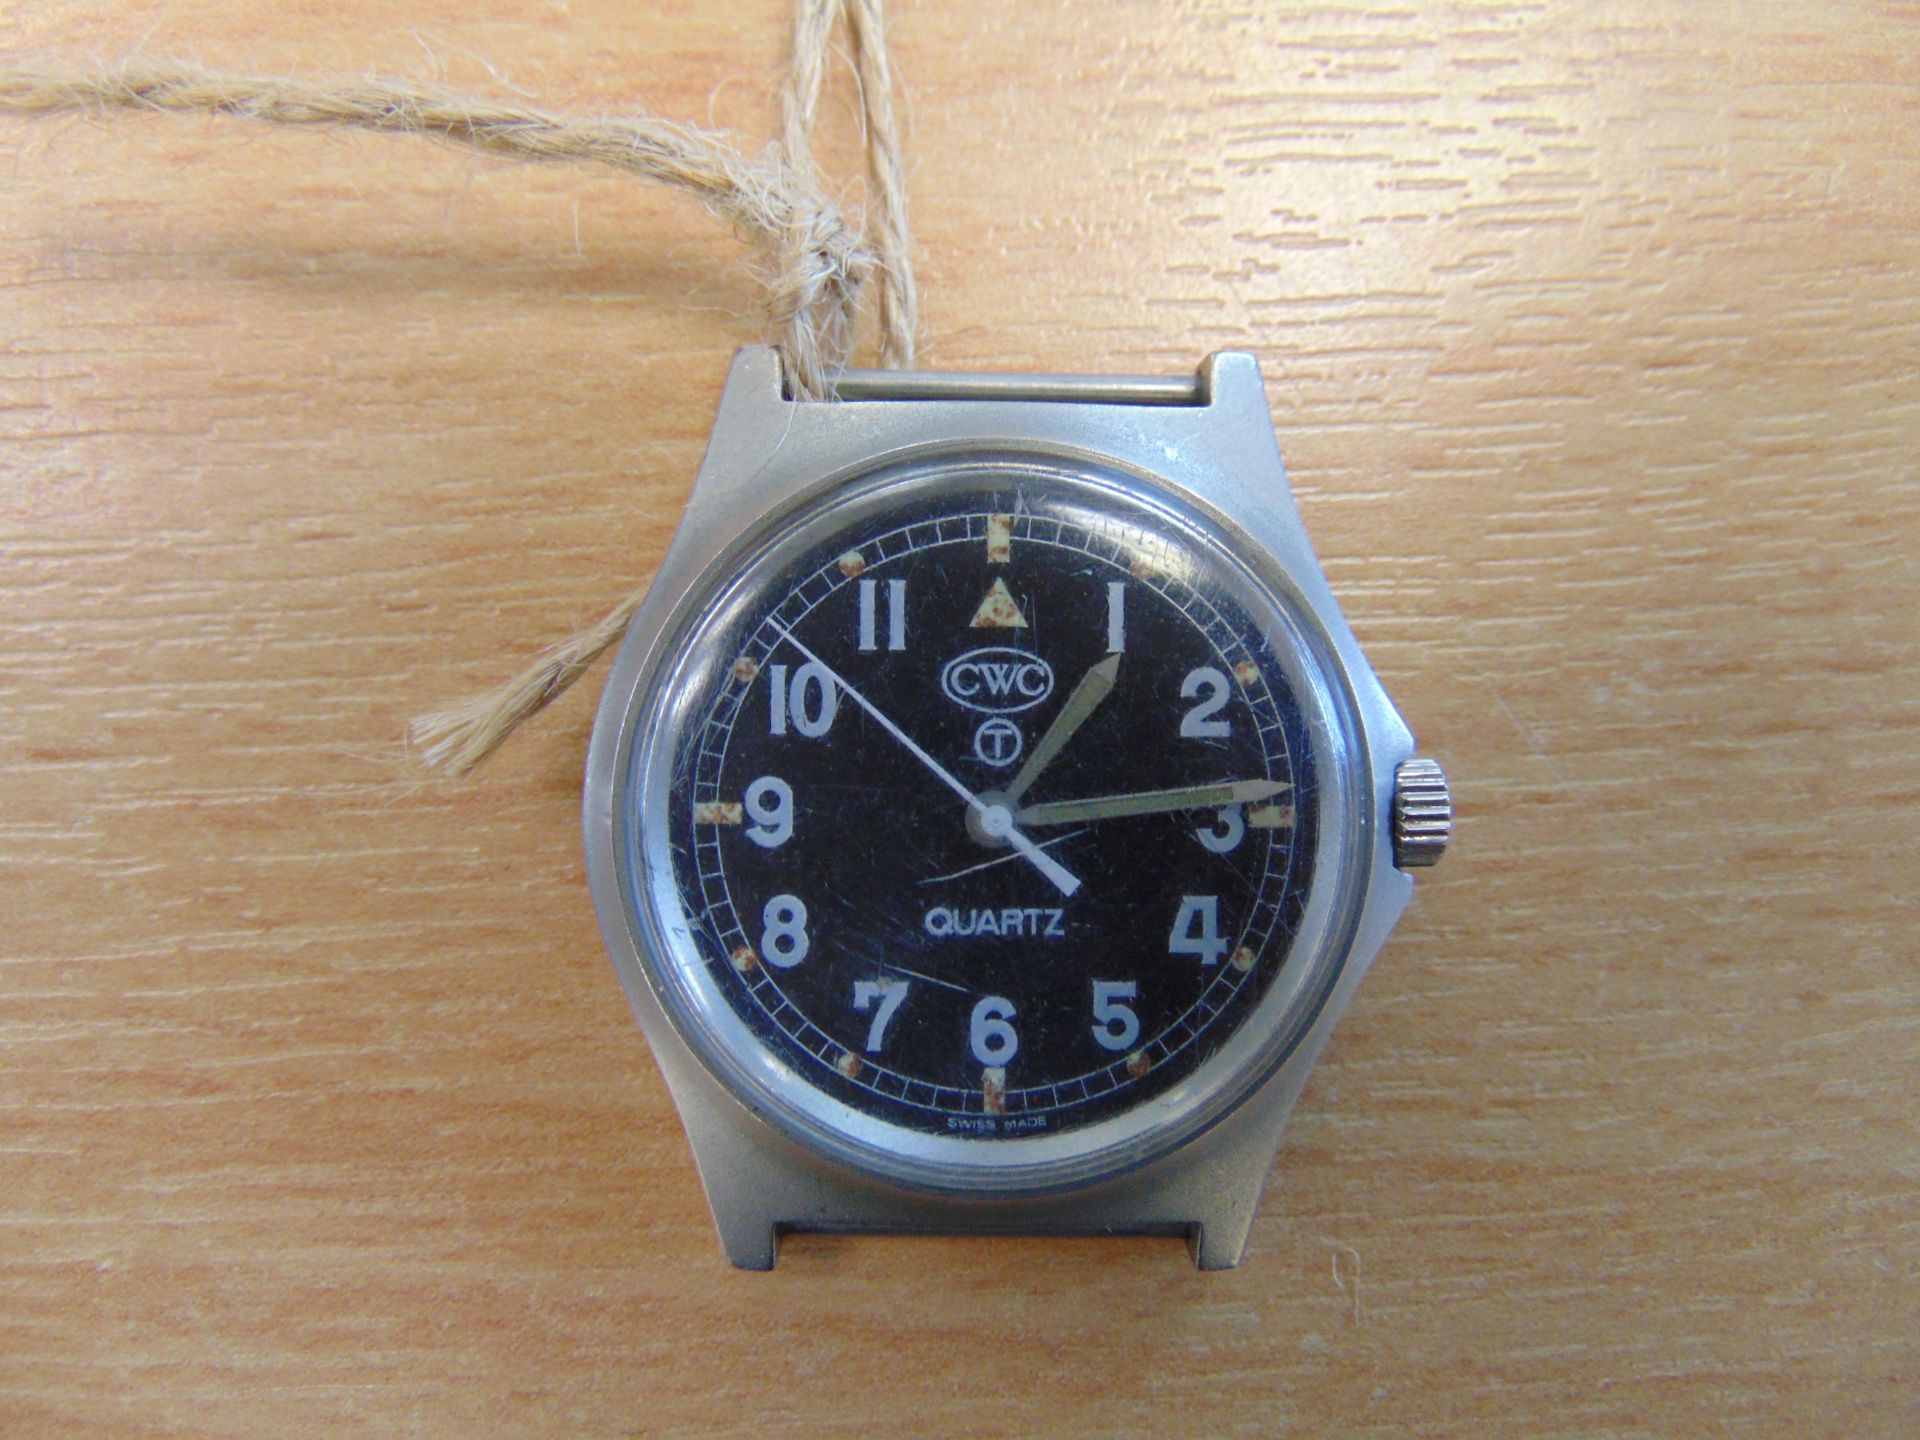 Rare CWC 0552 Royal Marines / Navy Issue Service Watch Nato Marks, Date 1990, * GULF WAR 1 * - Image 2 of 4